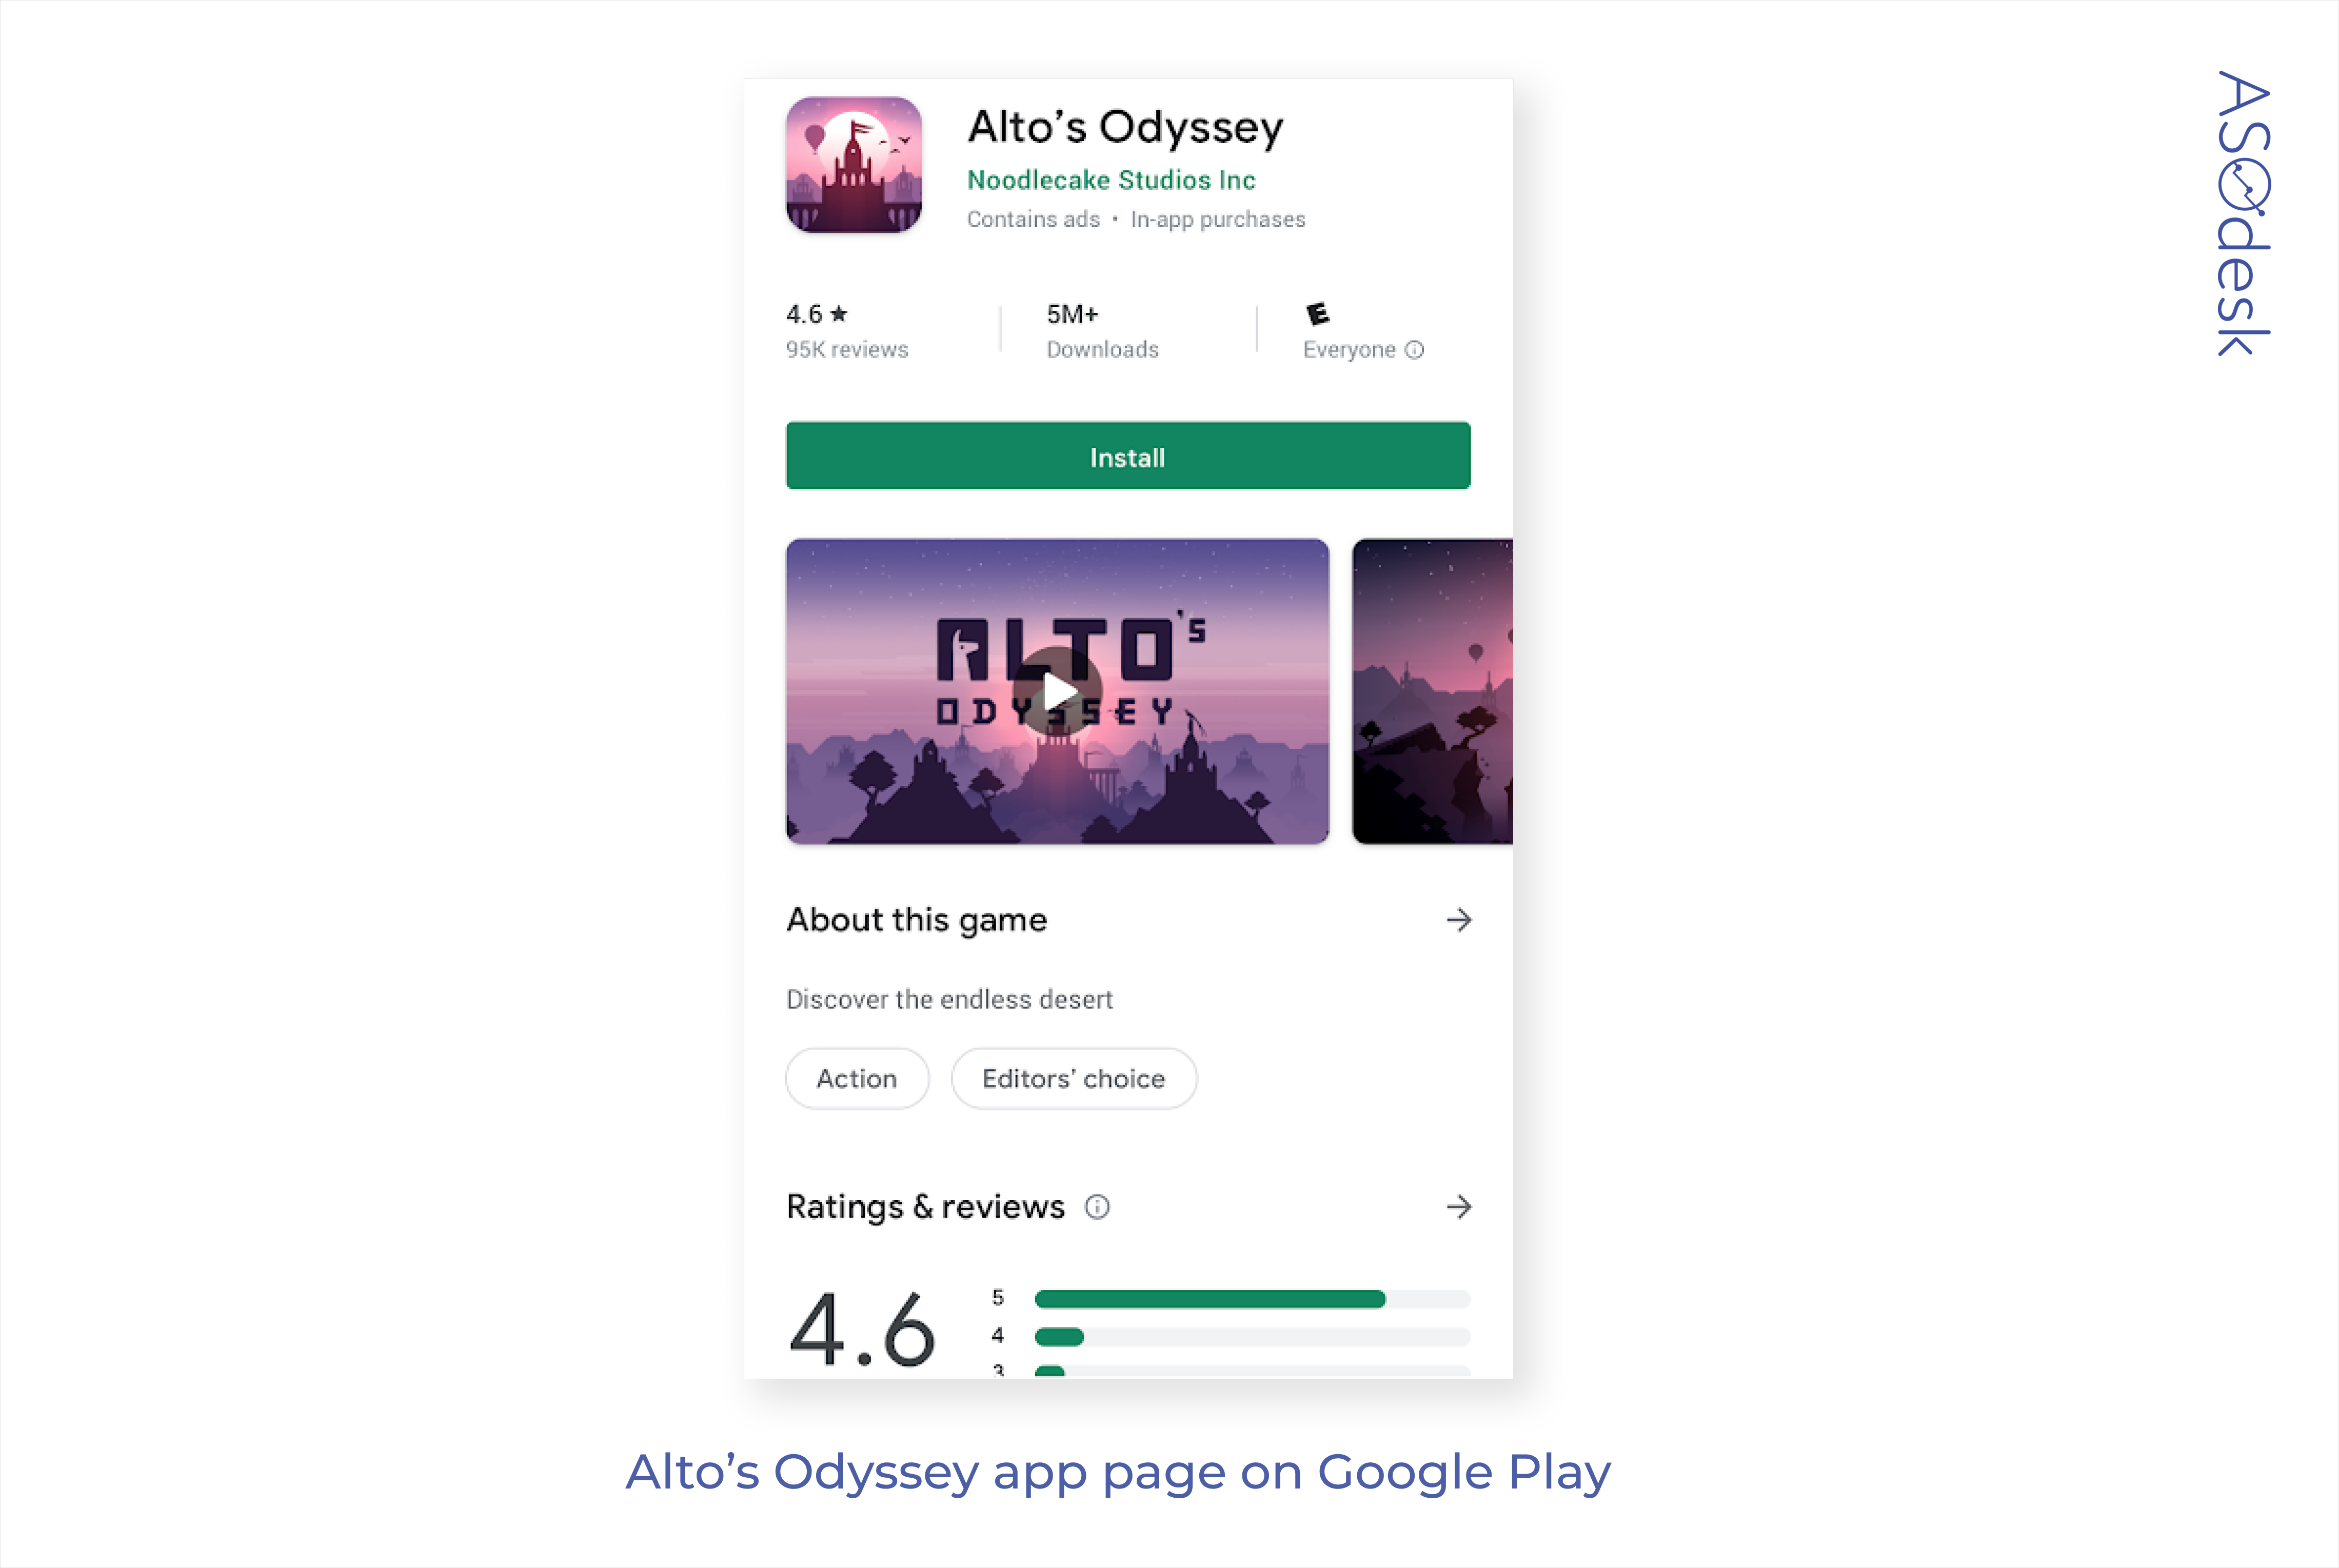 The app page example on Google Play